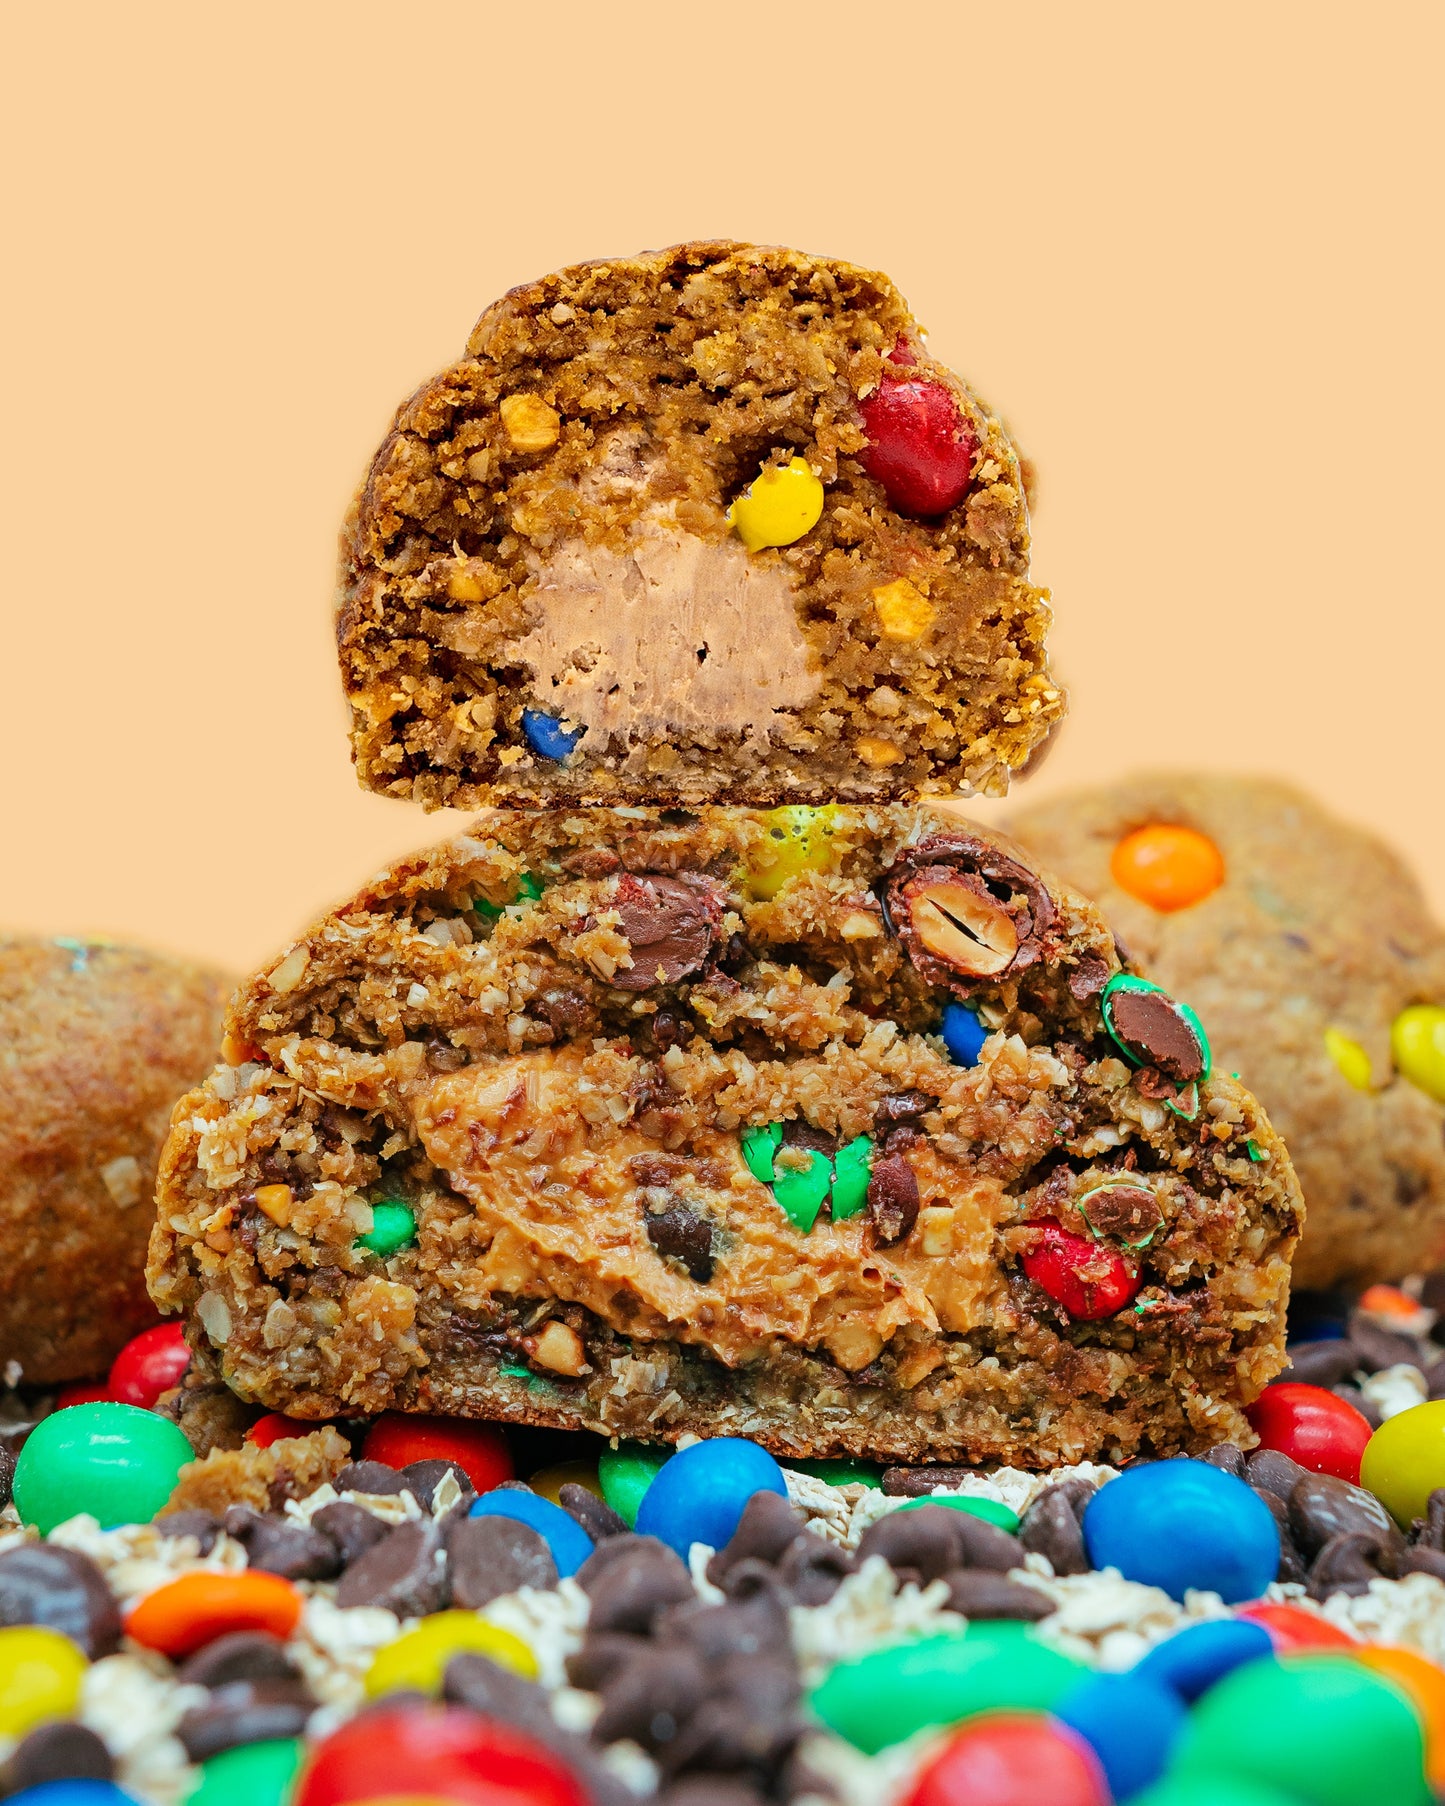 MEGA 1lb Incogni-dough Gluten sensitive cookie made with oatmeal and M&Ms 